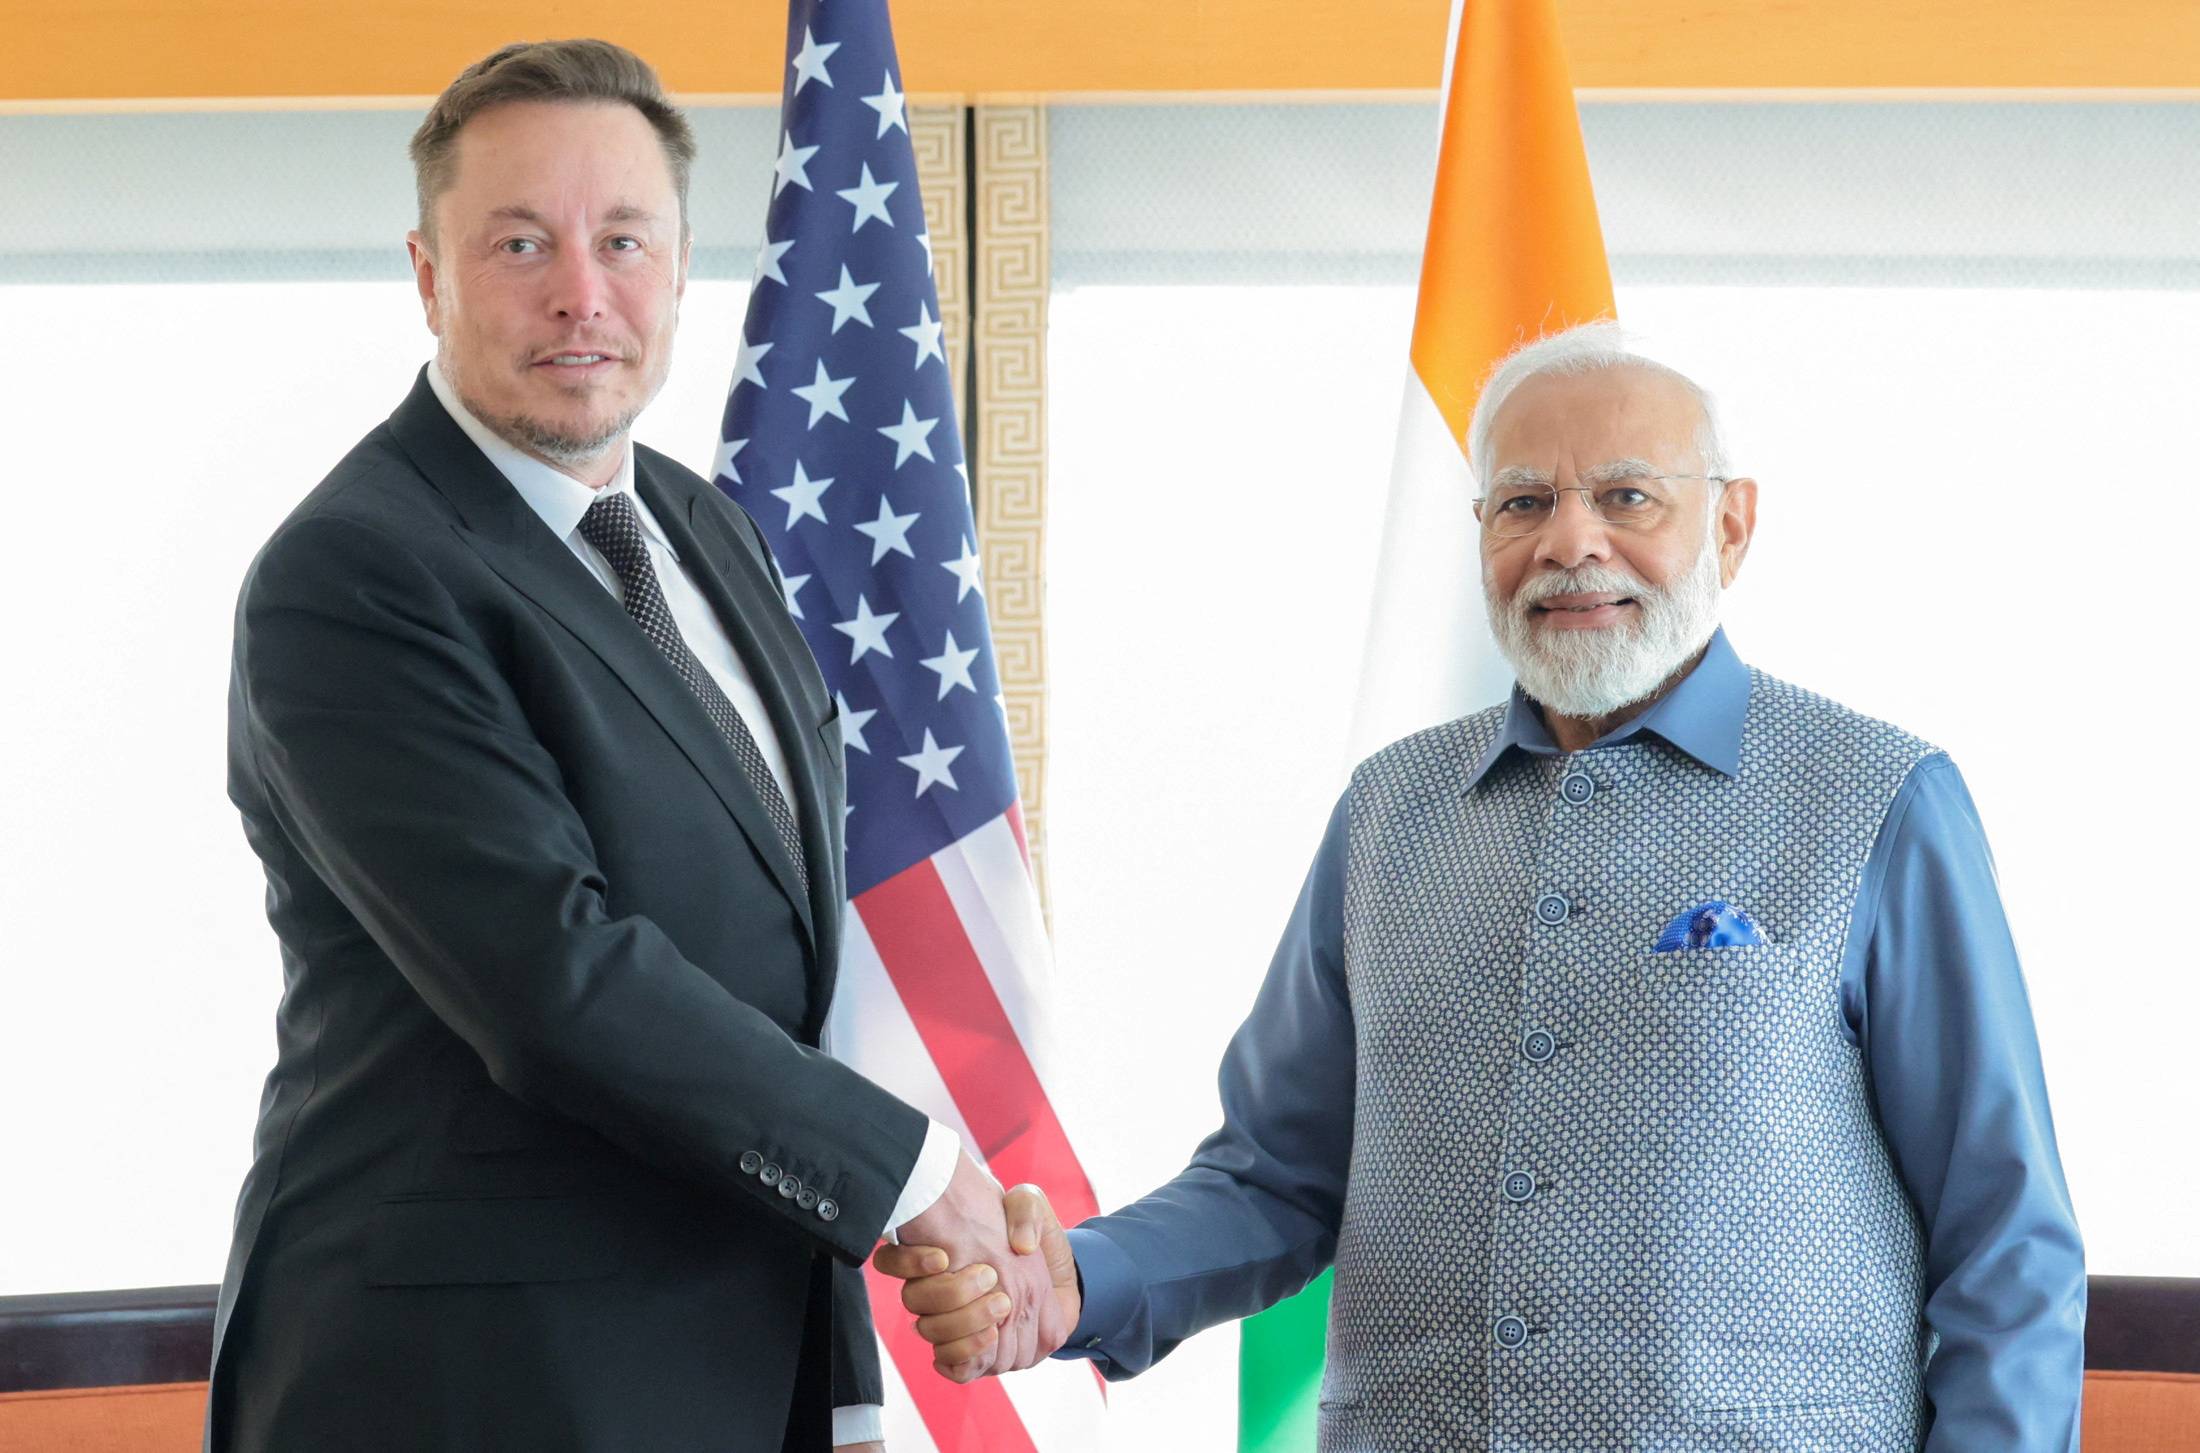 Indian Prime Minister Narendra Modi meets with Tesla chief executive Elon Musk in New York City on Tuesday. | INDIA'S PRESS INFORMATION BUREAU / VIA REUTERS